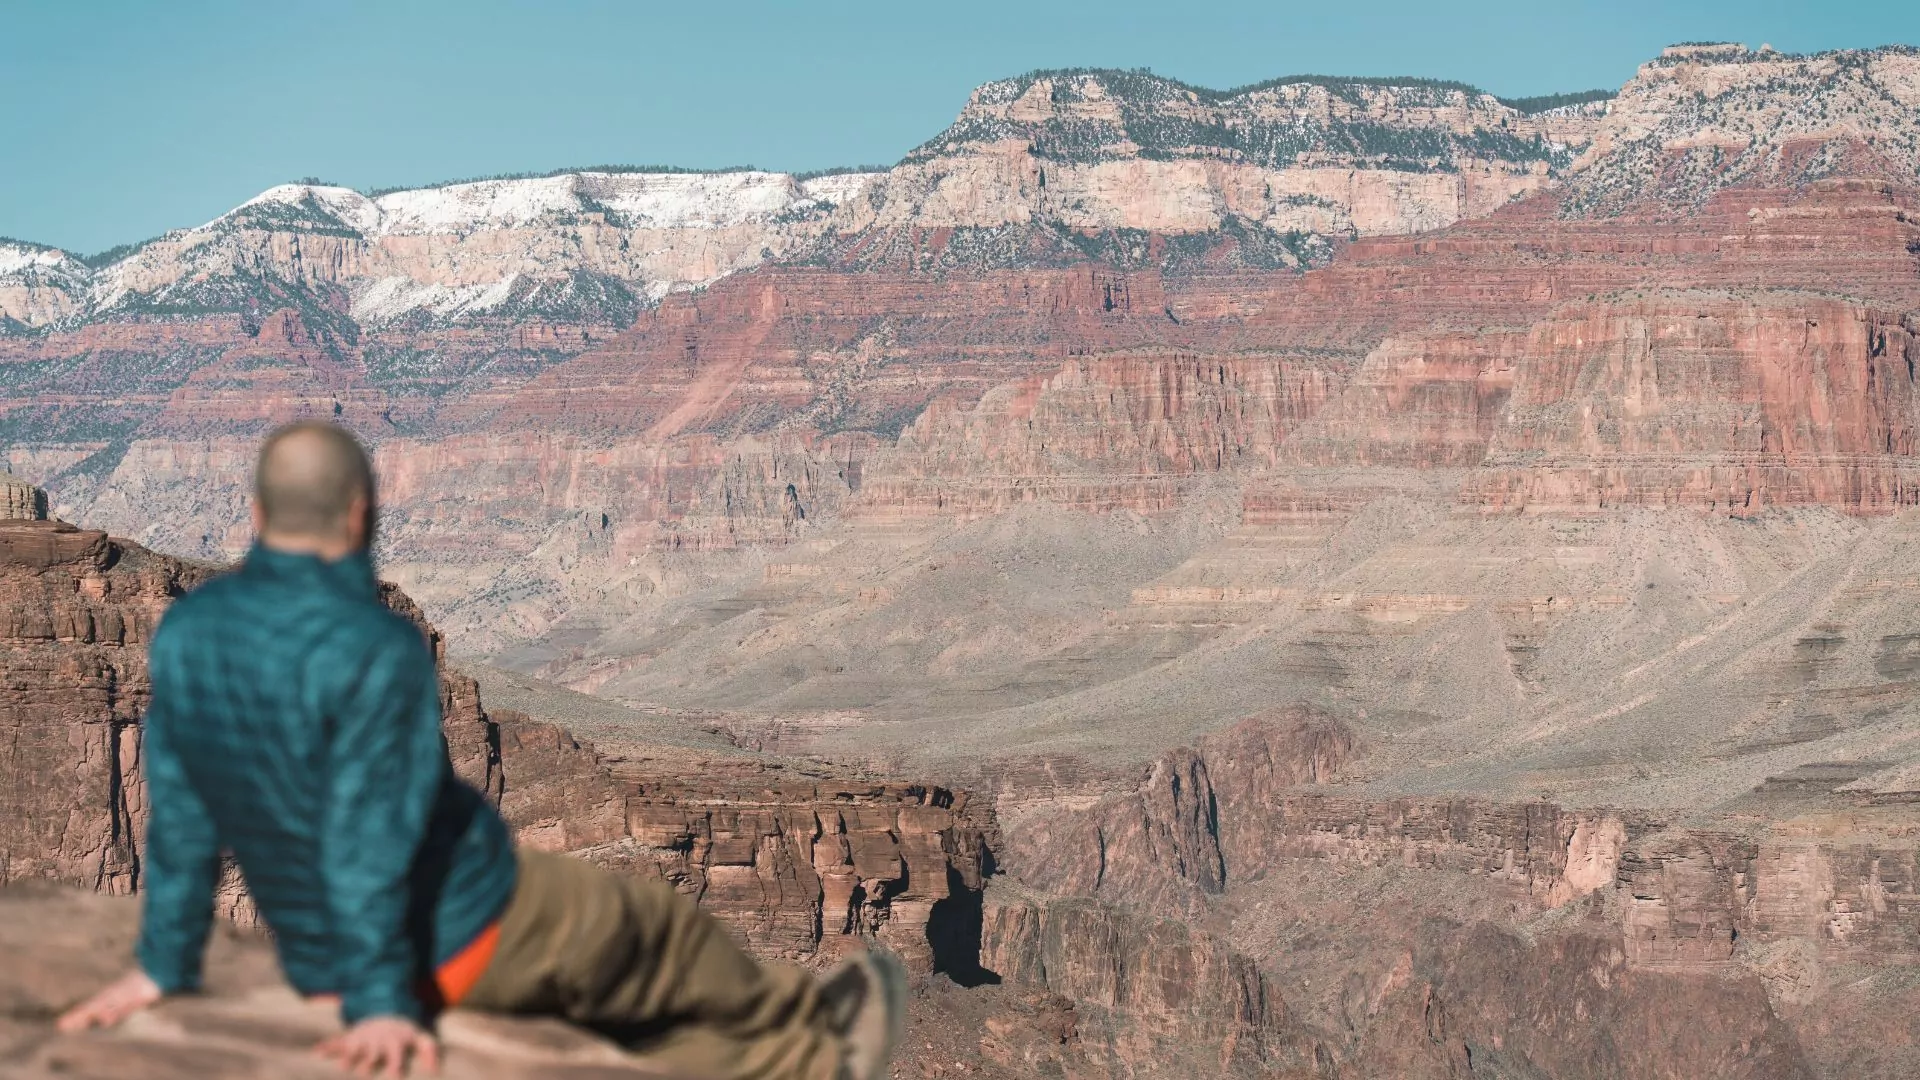 A man sits leaning back with legs outstretched taking in a view of the Grand Canyon